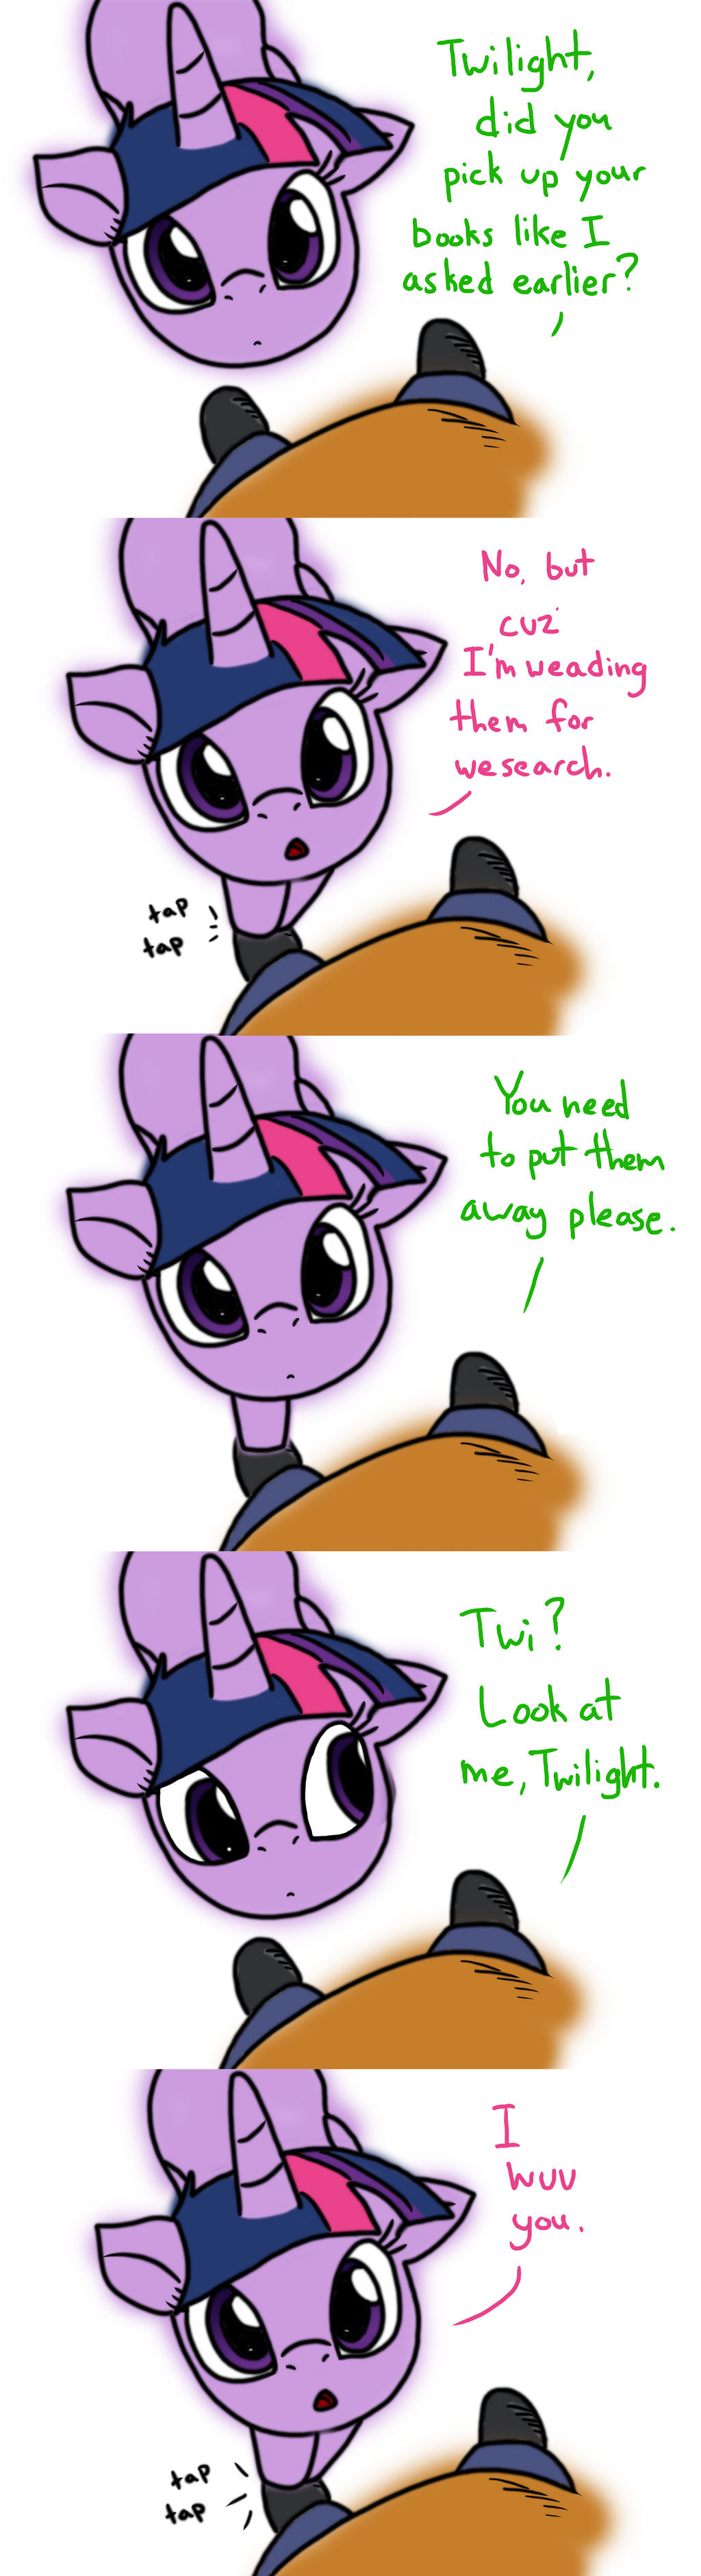 Twi And Anon: Wuv